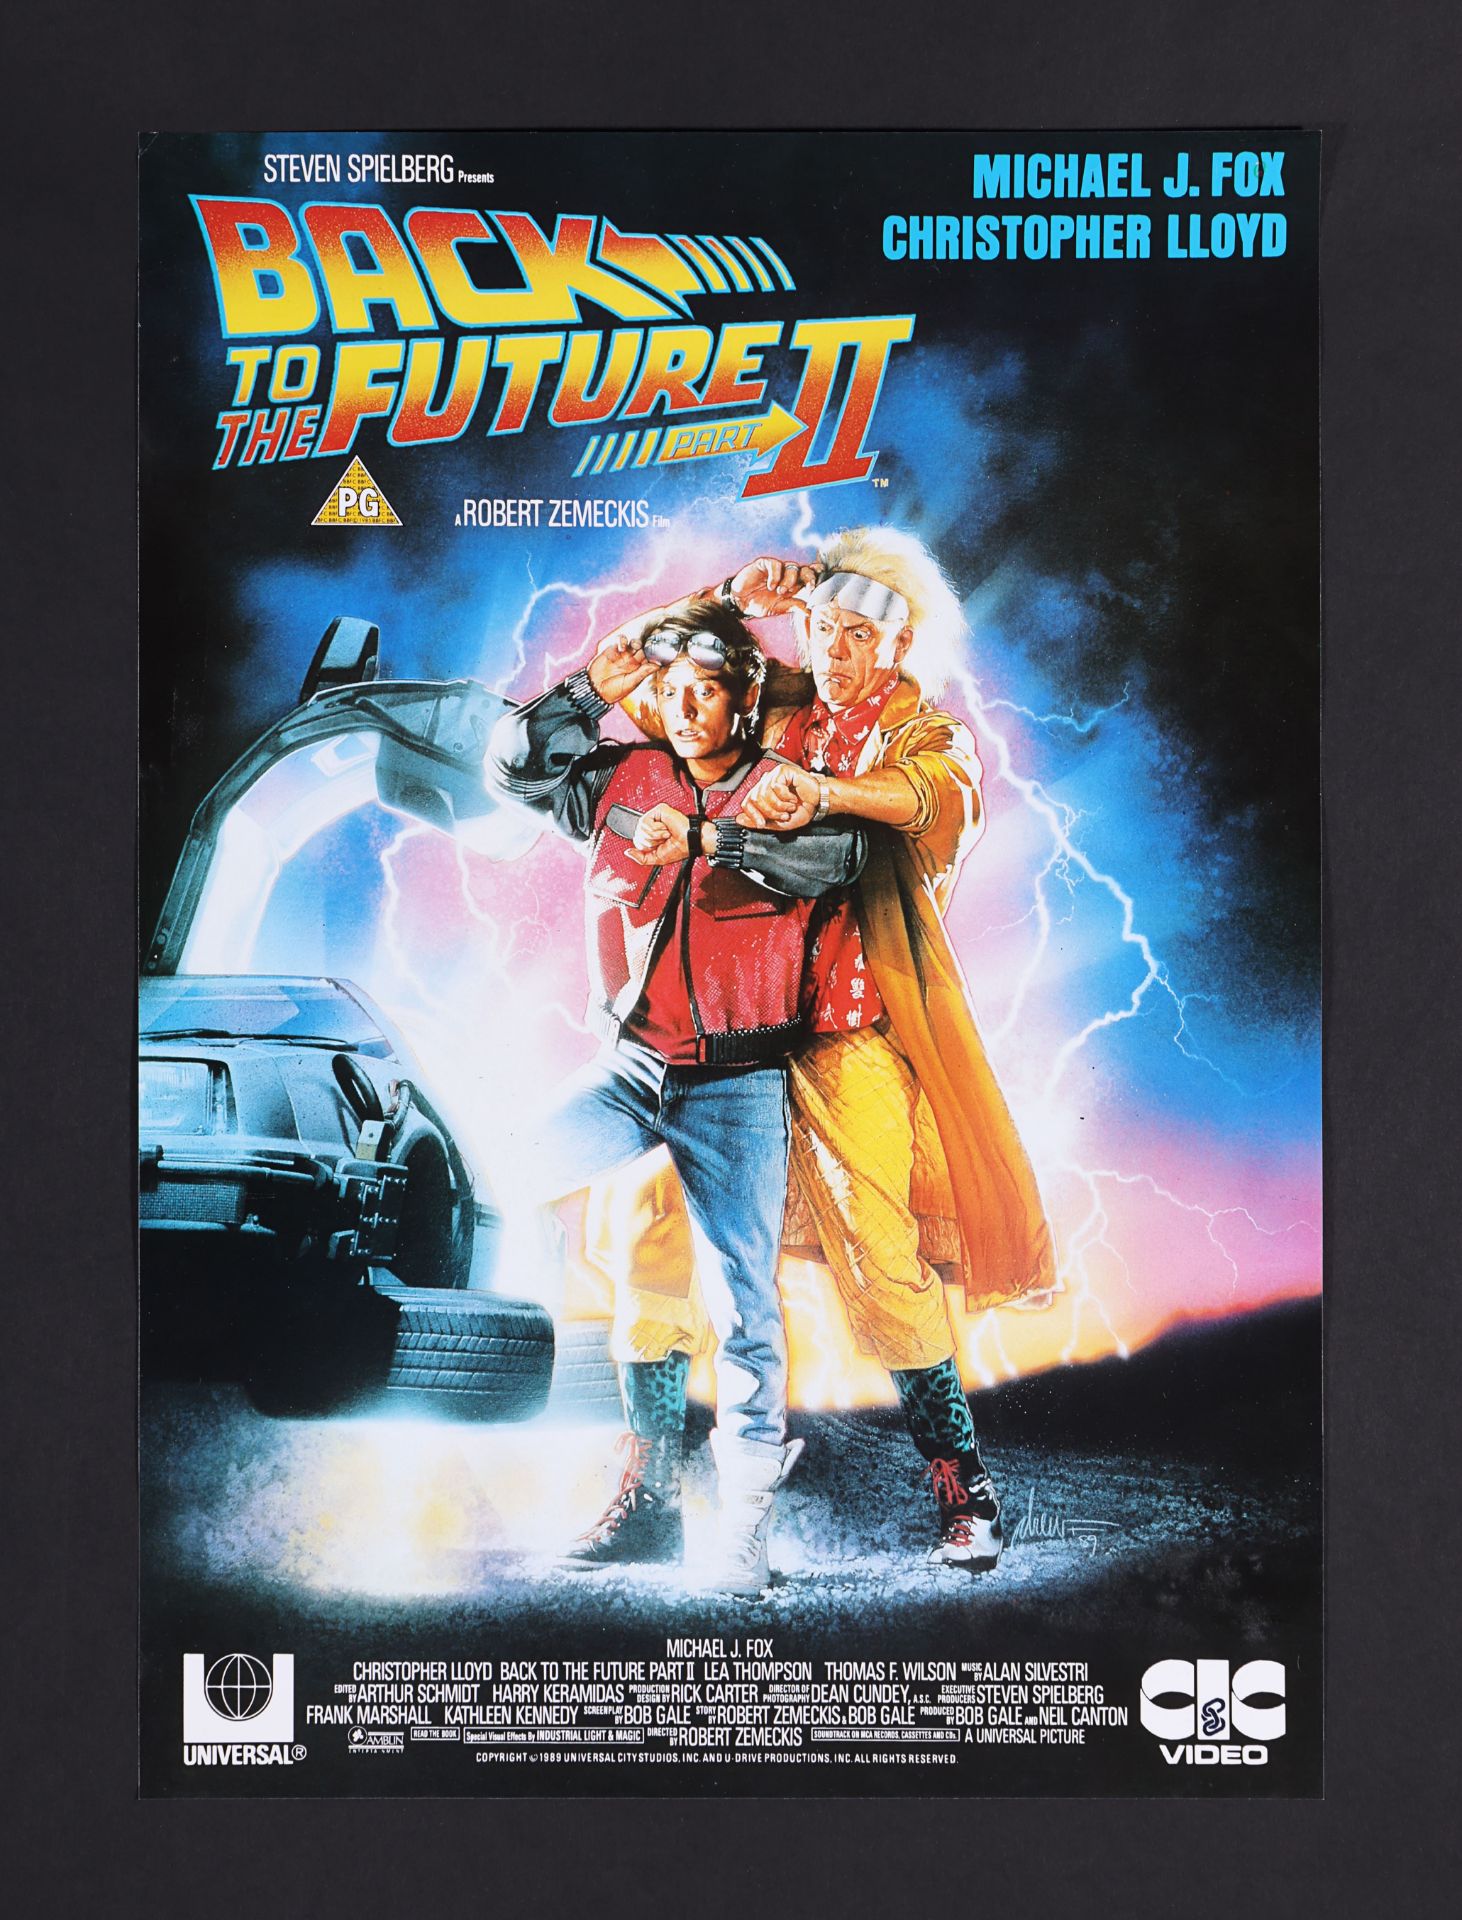 BACK TO THE FUTURE TRILOGY (1985-1990) - Three UK Video Posters, 1986 - 1991 - Image 2 of 3